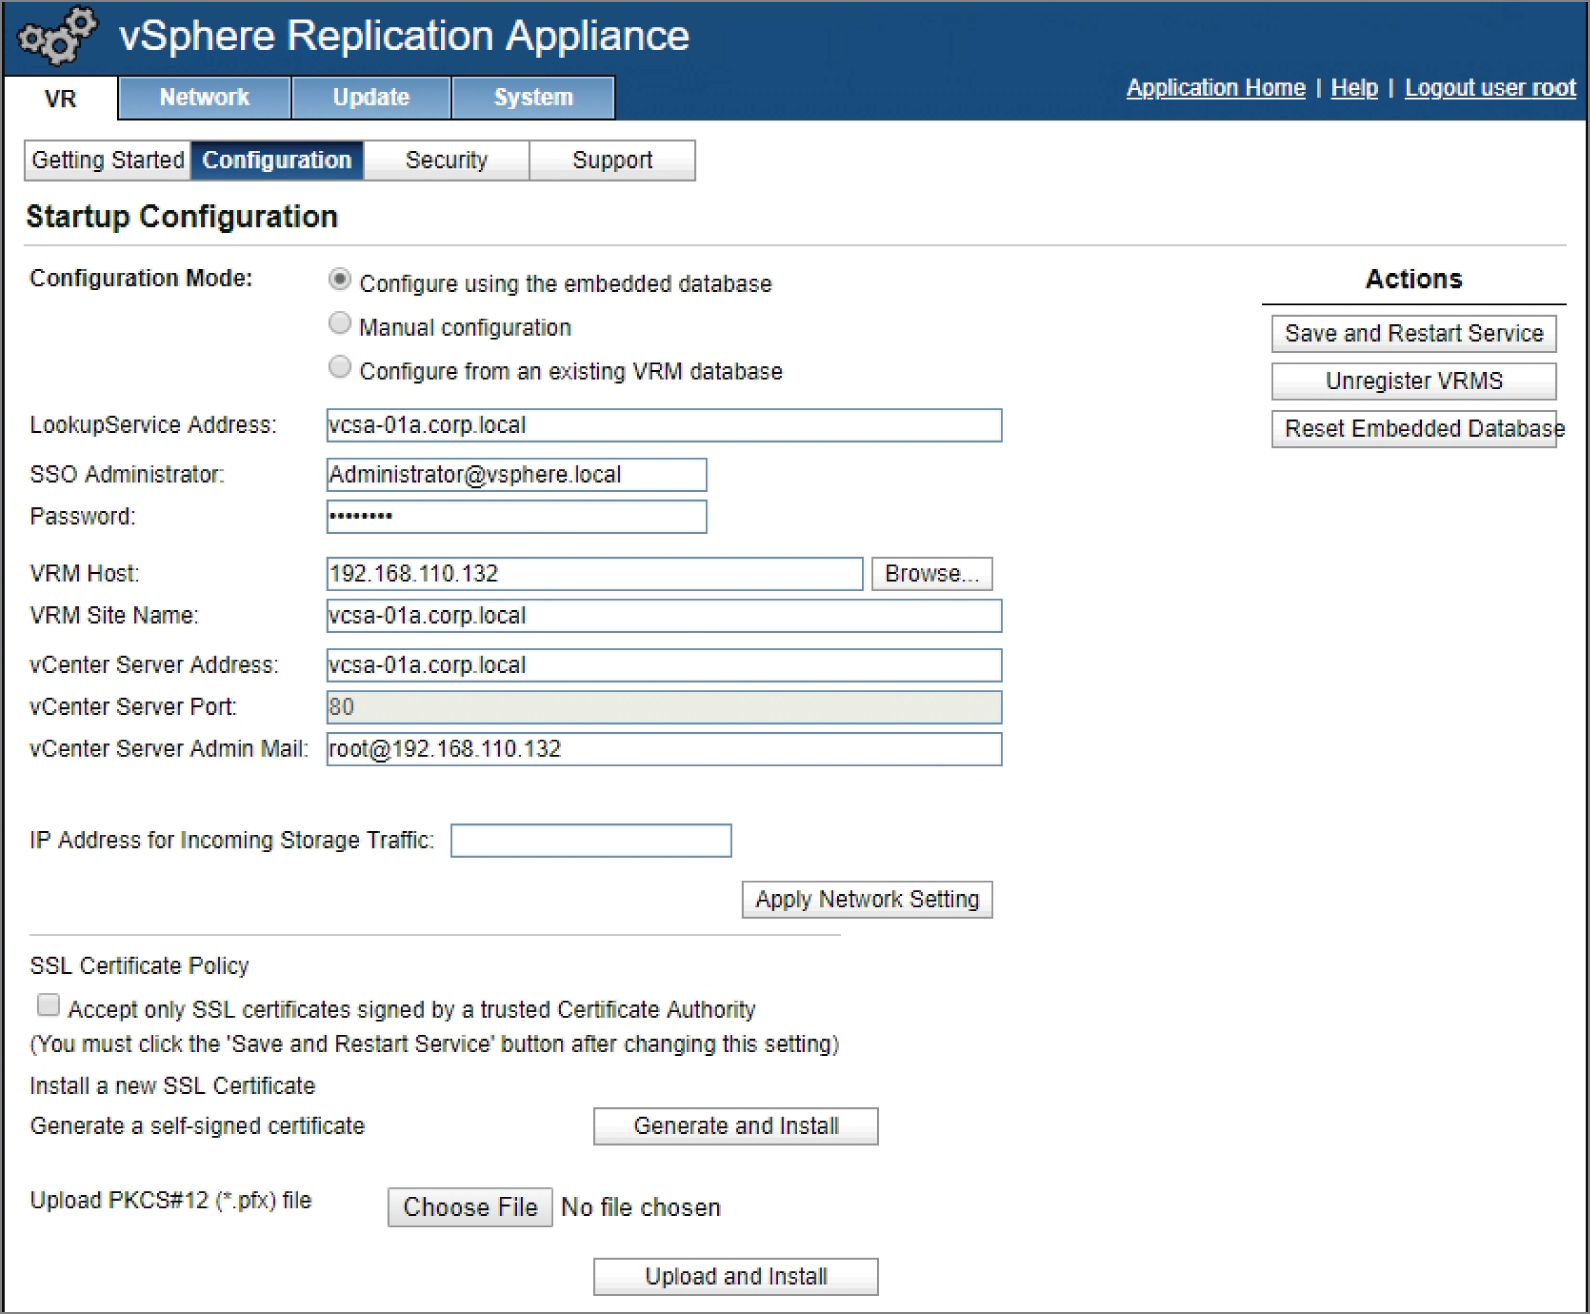 Snapshot of the vSphere Replication appliance configuration.